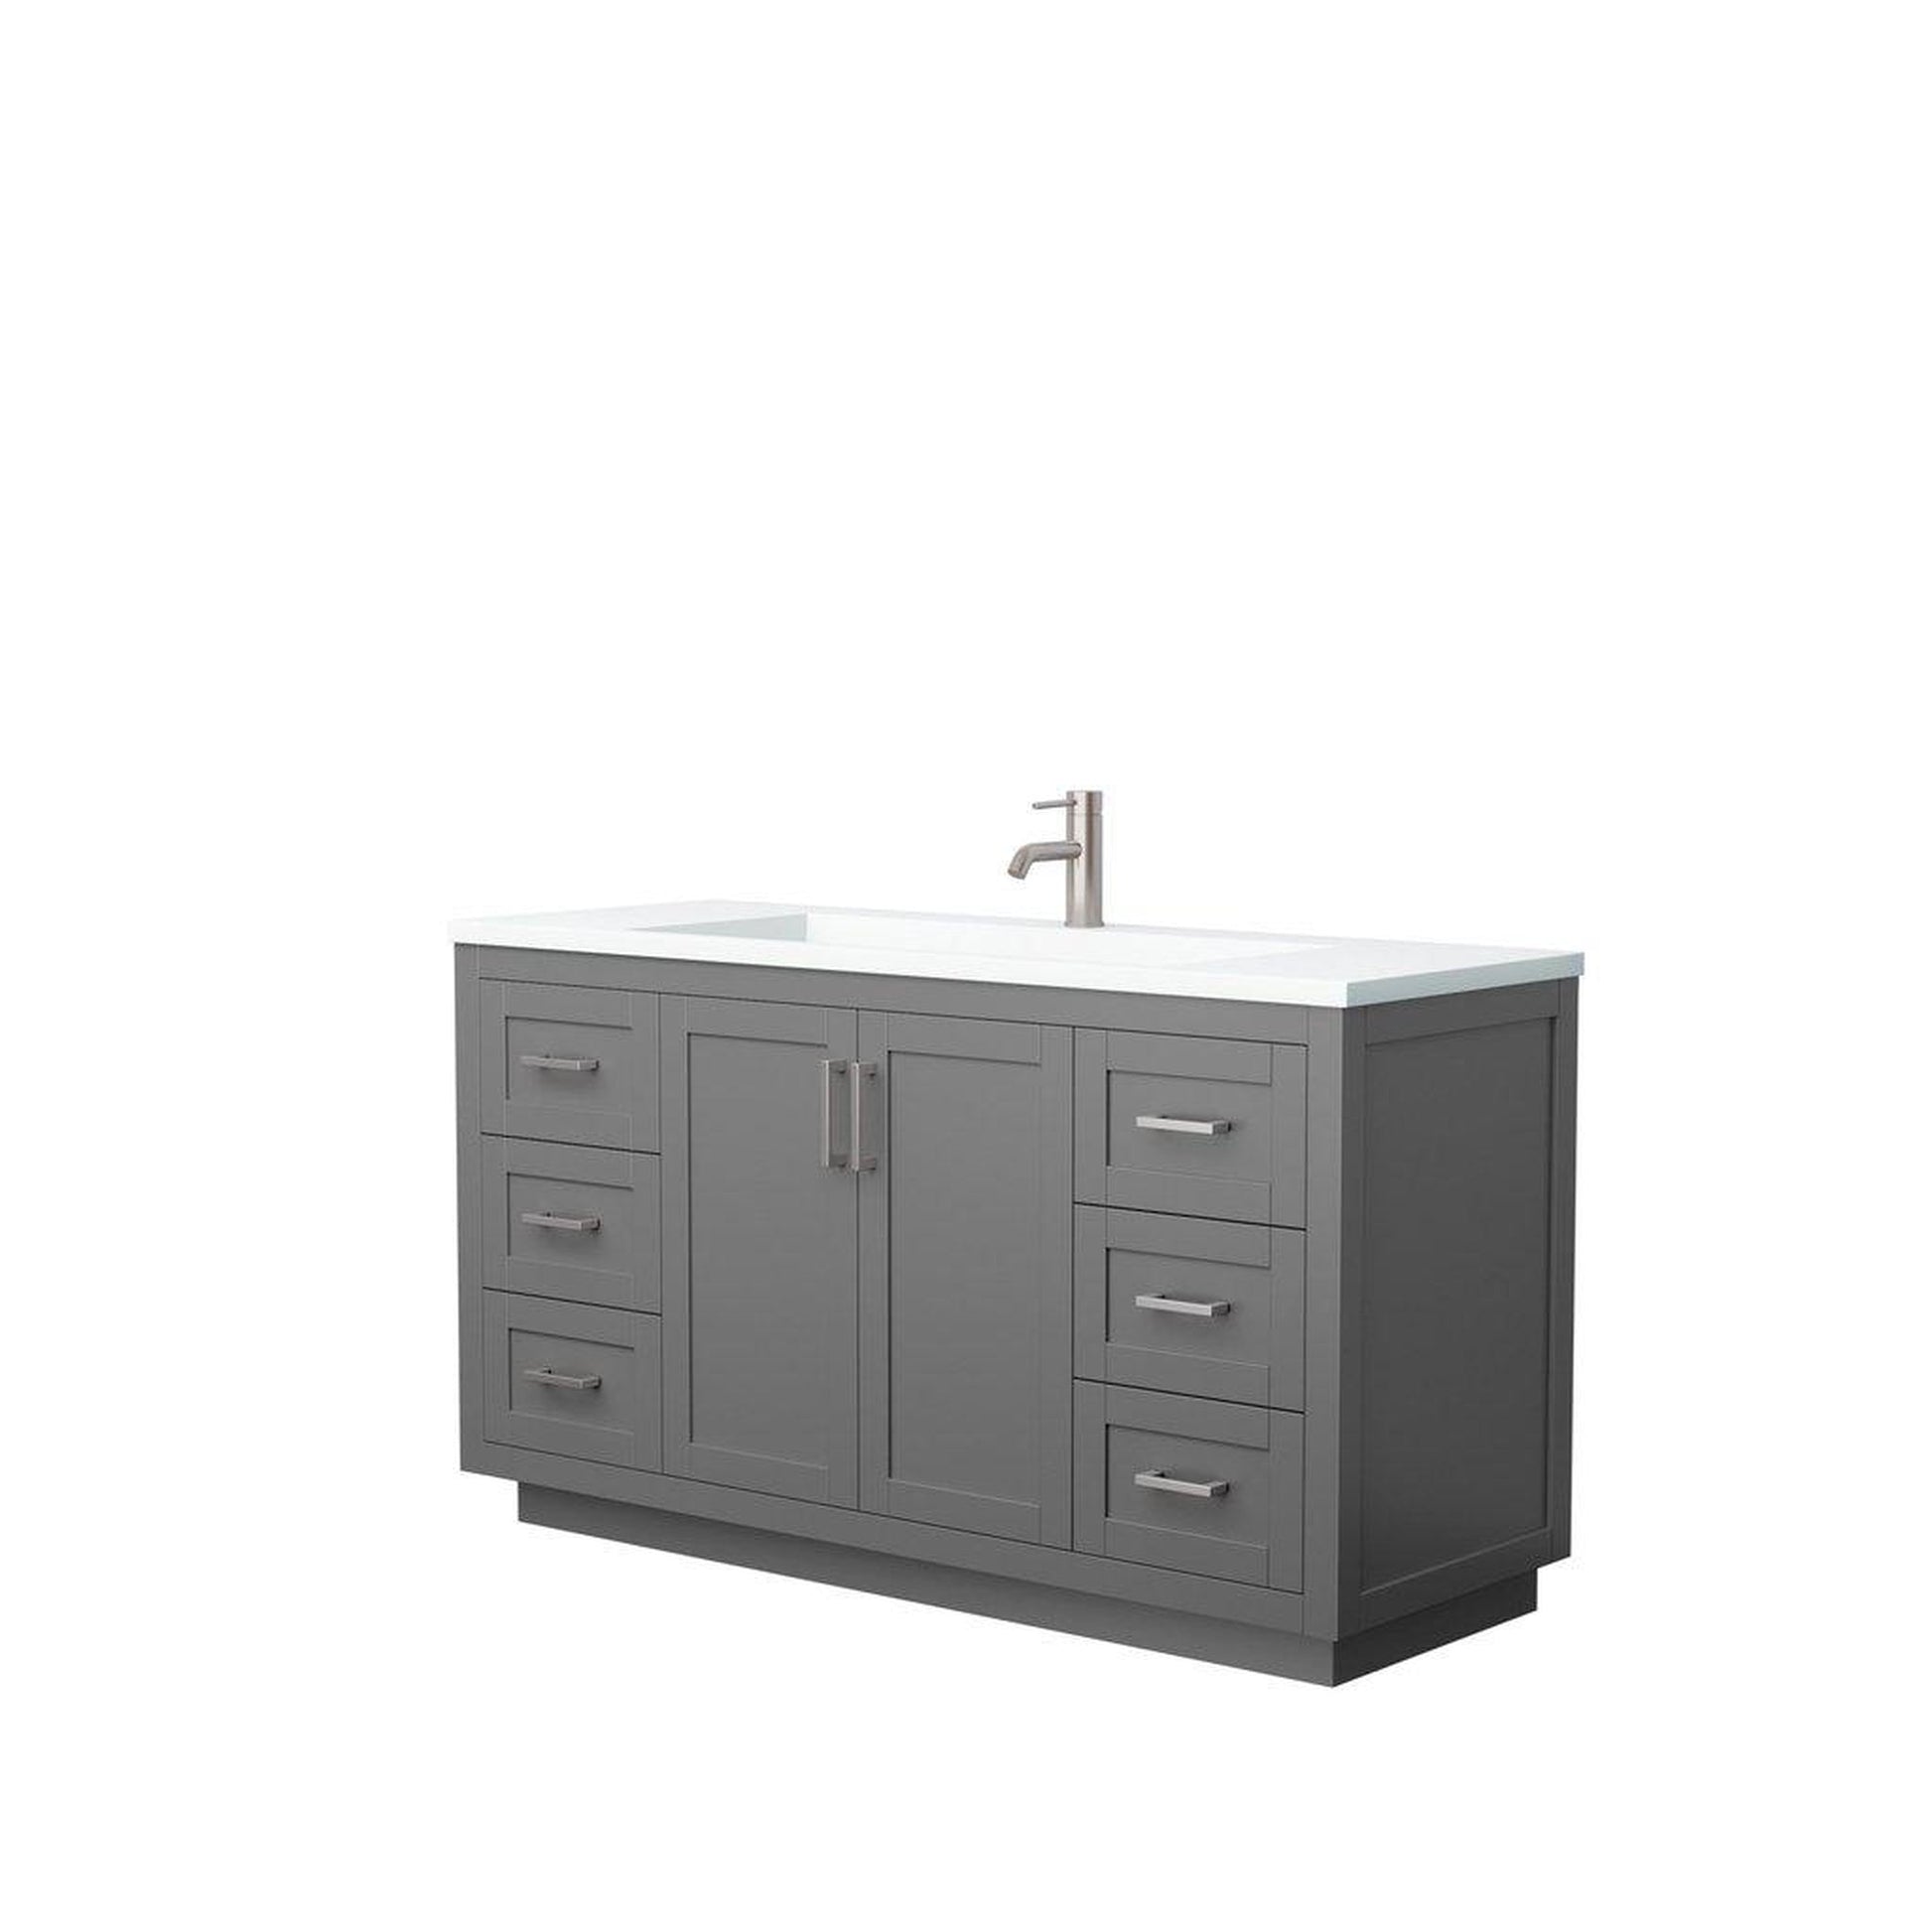 Wyndham Collection Miranda 60" Single Bathroom Dark Gray Vanity Set With 1.25" Thick Matte White Solid Surface Countertop, Integrated Sink, And Brushed Nickel Trim